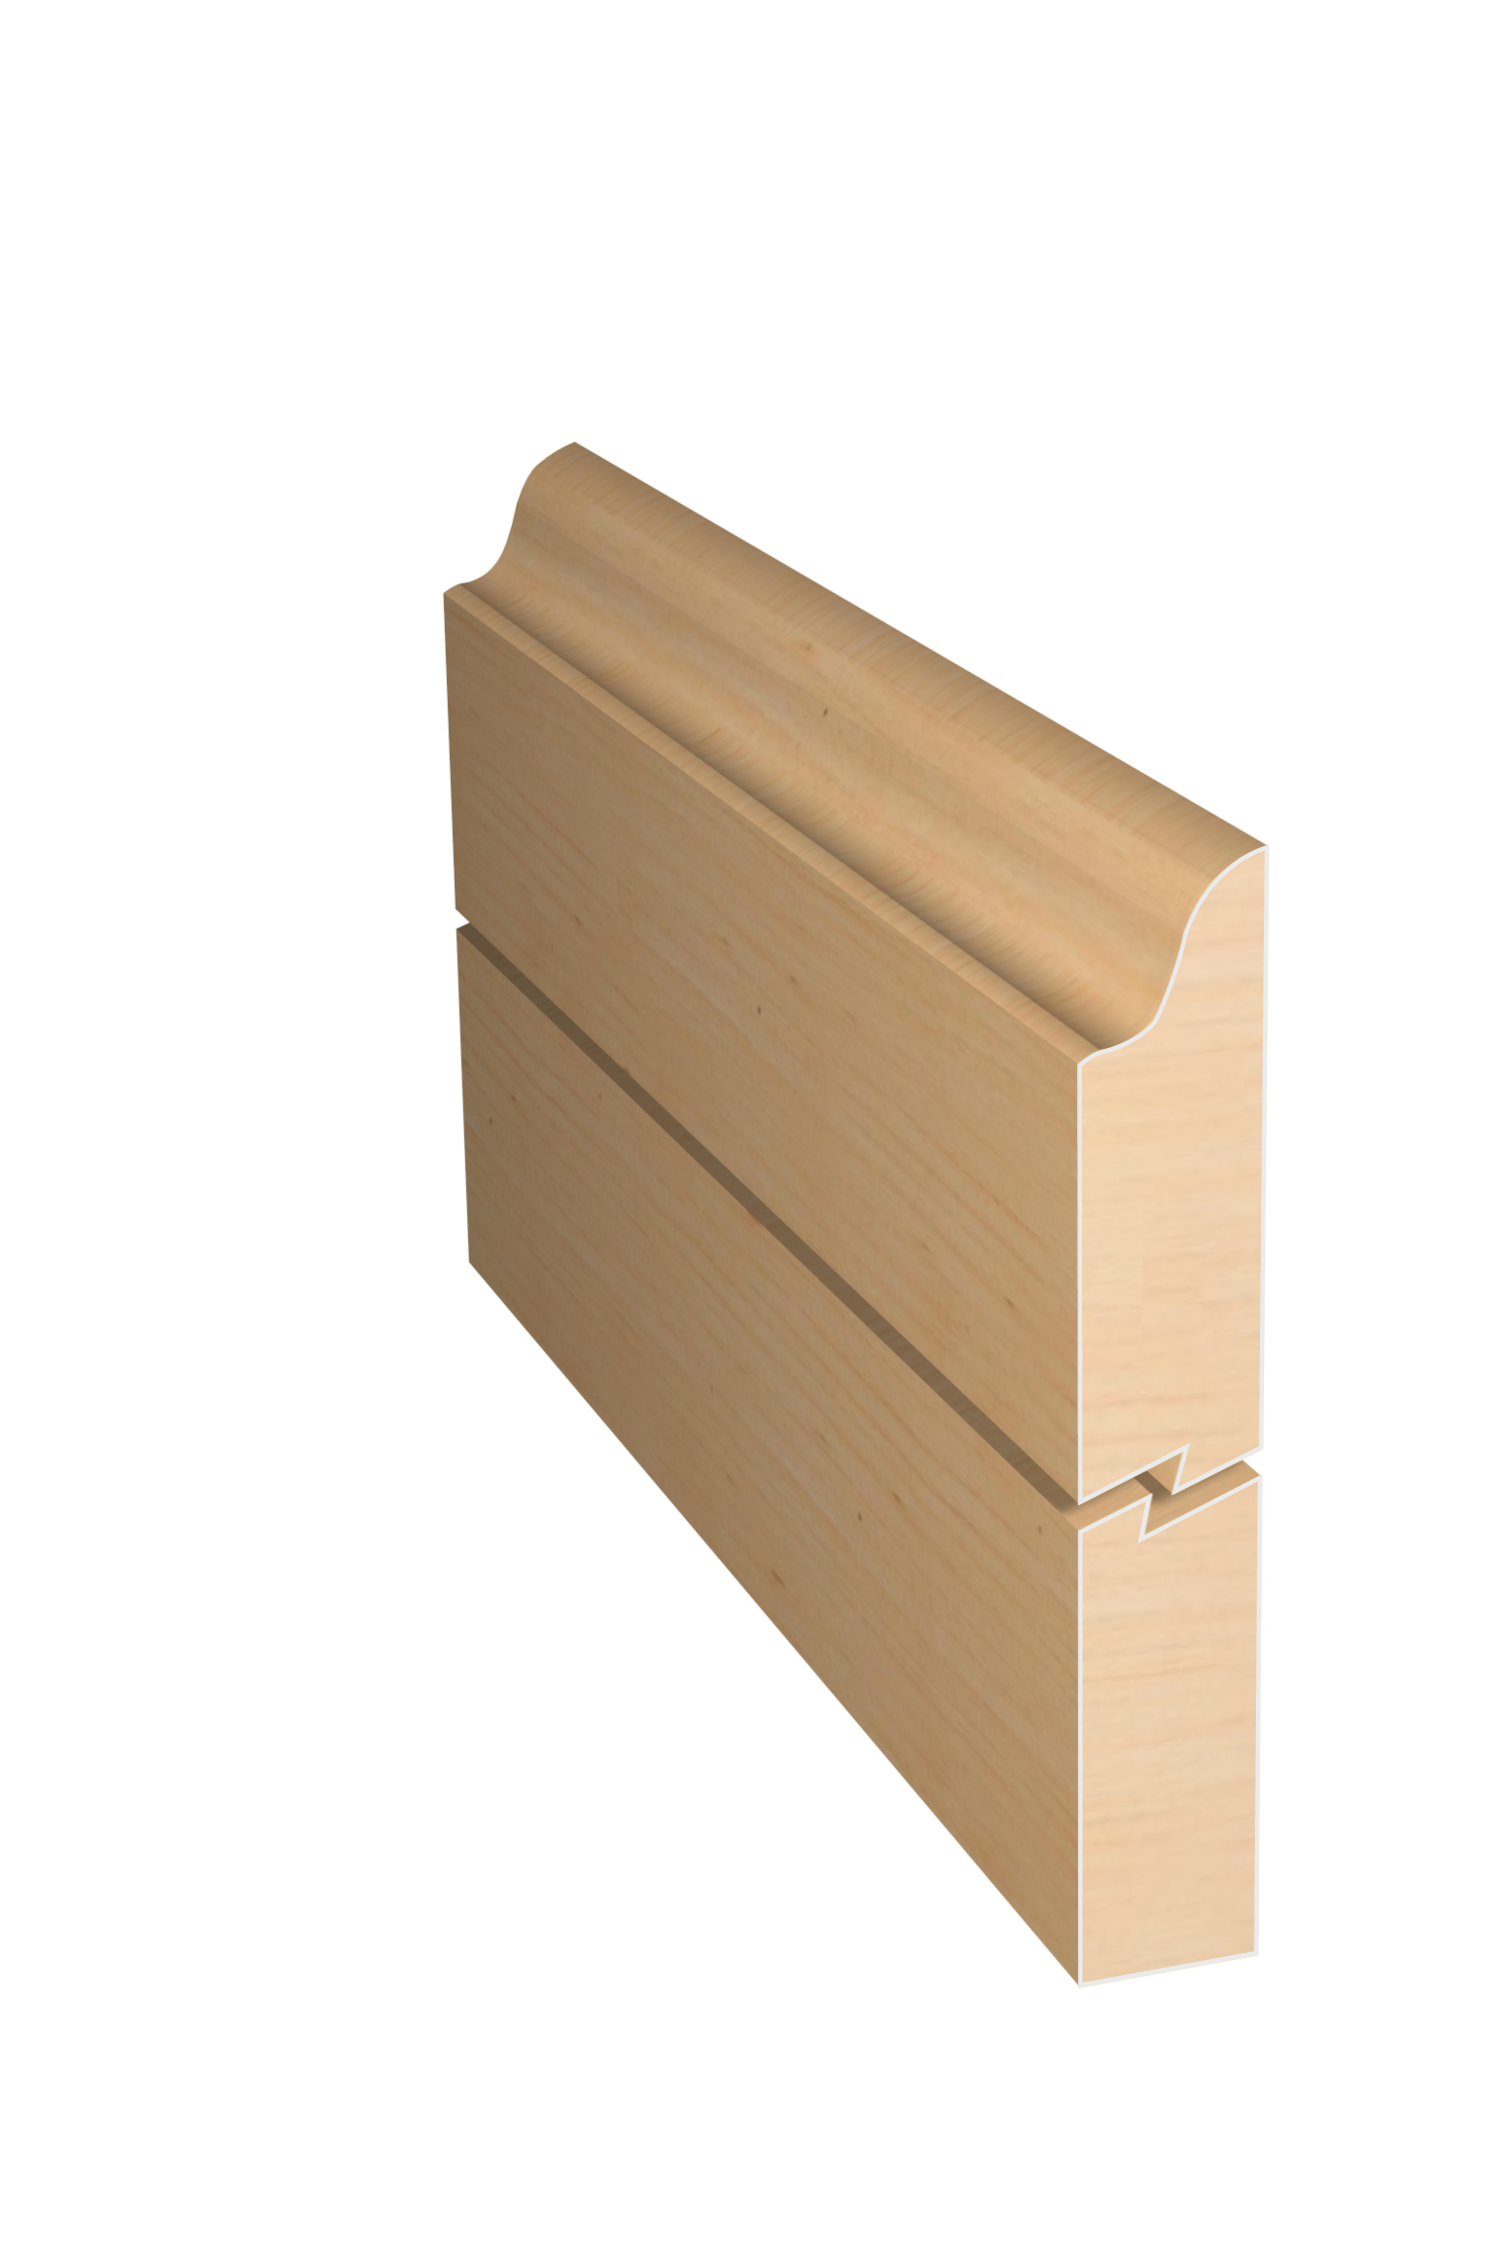 Three dimensional rendering of custom edge profile wood molding SKPL66 made by Public Lumber Company in Detroit.